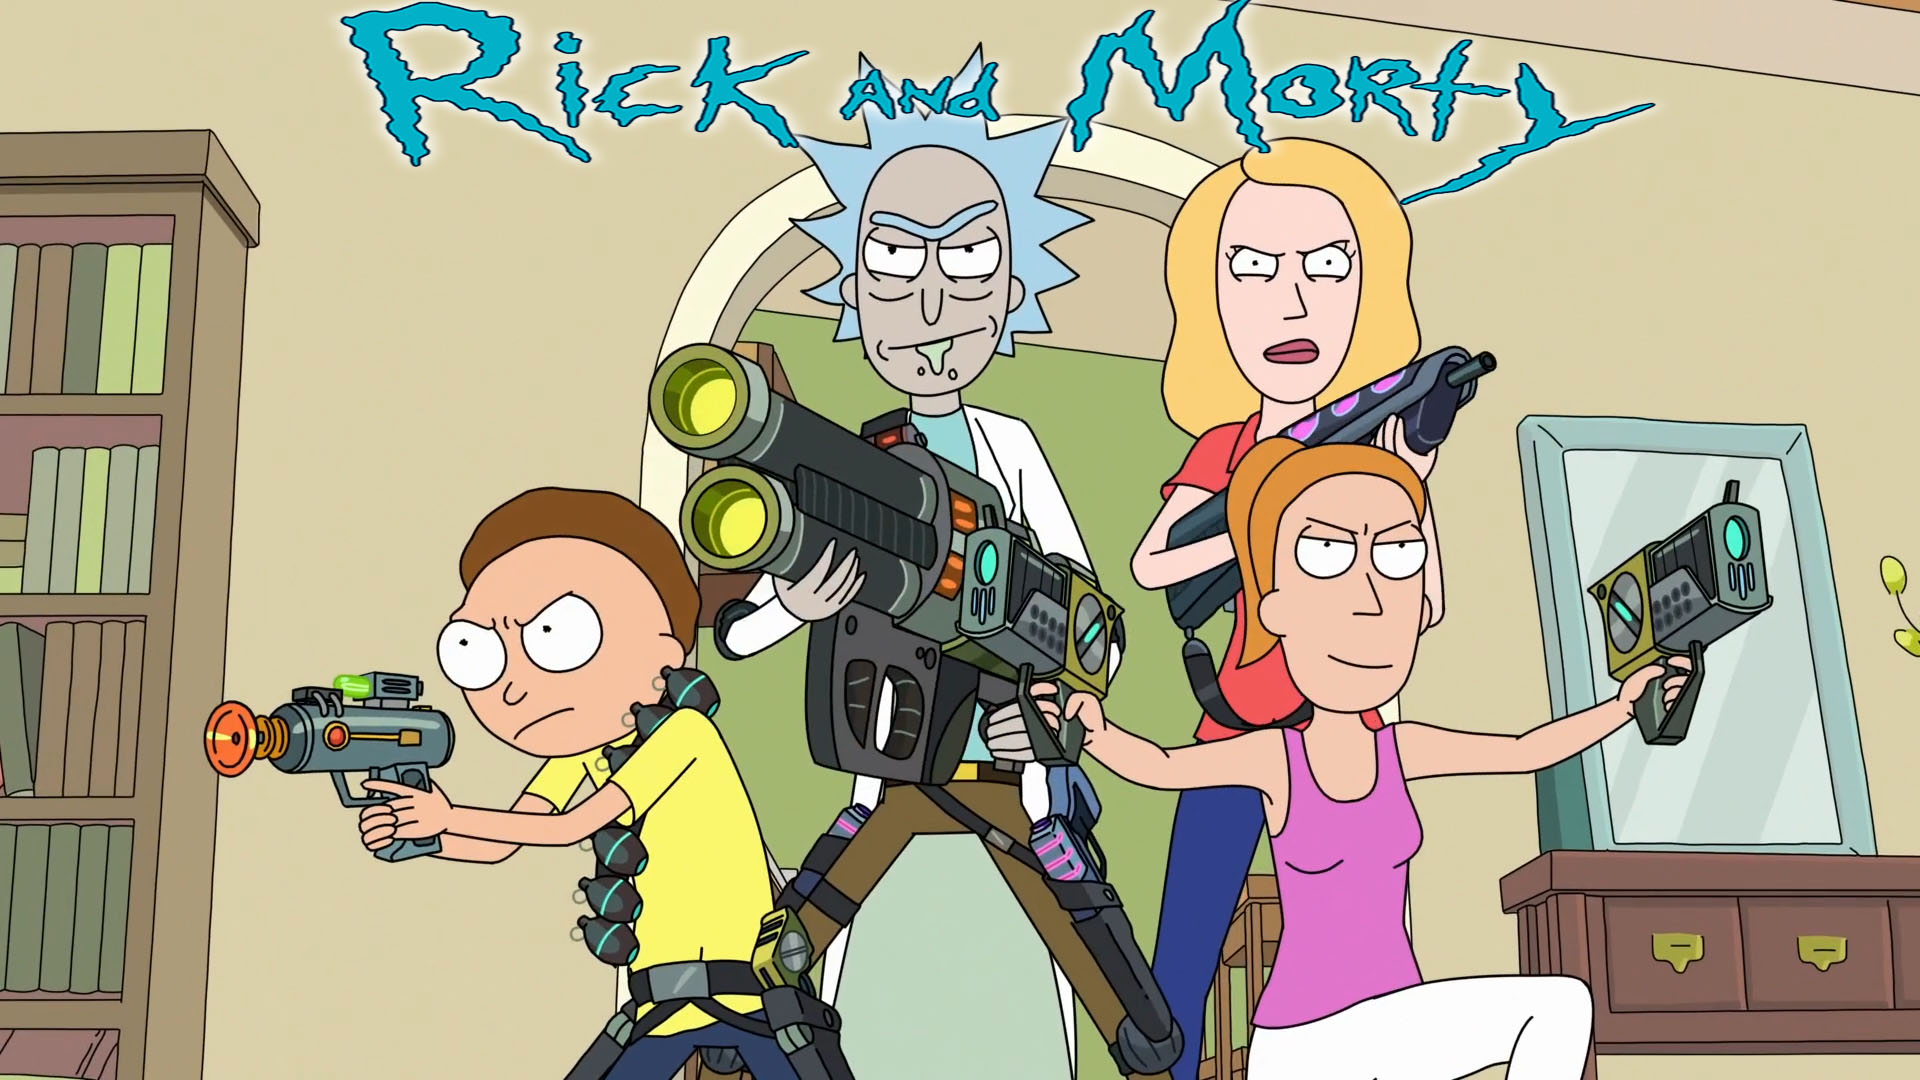 Mobile wallpaper: Tv Show, Rick And Morty, 901950 download the